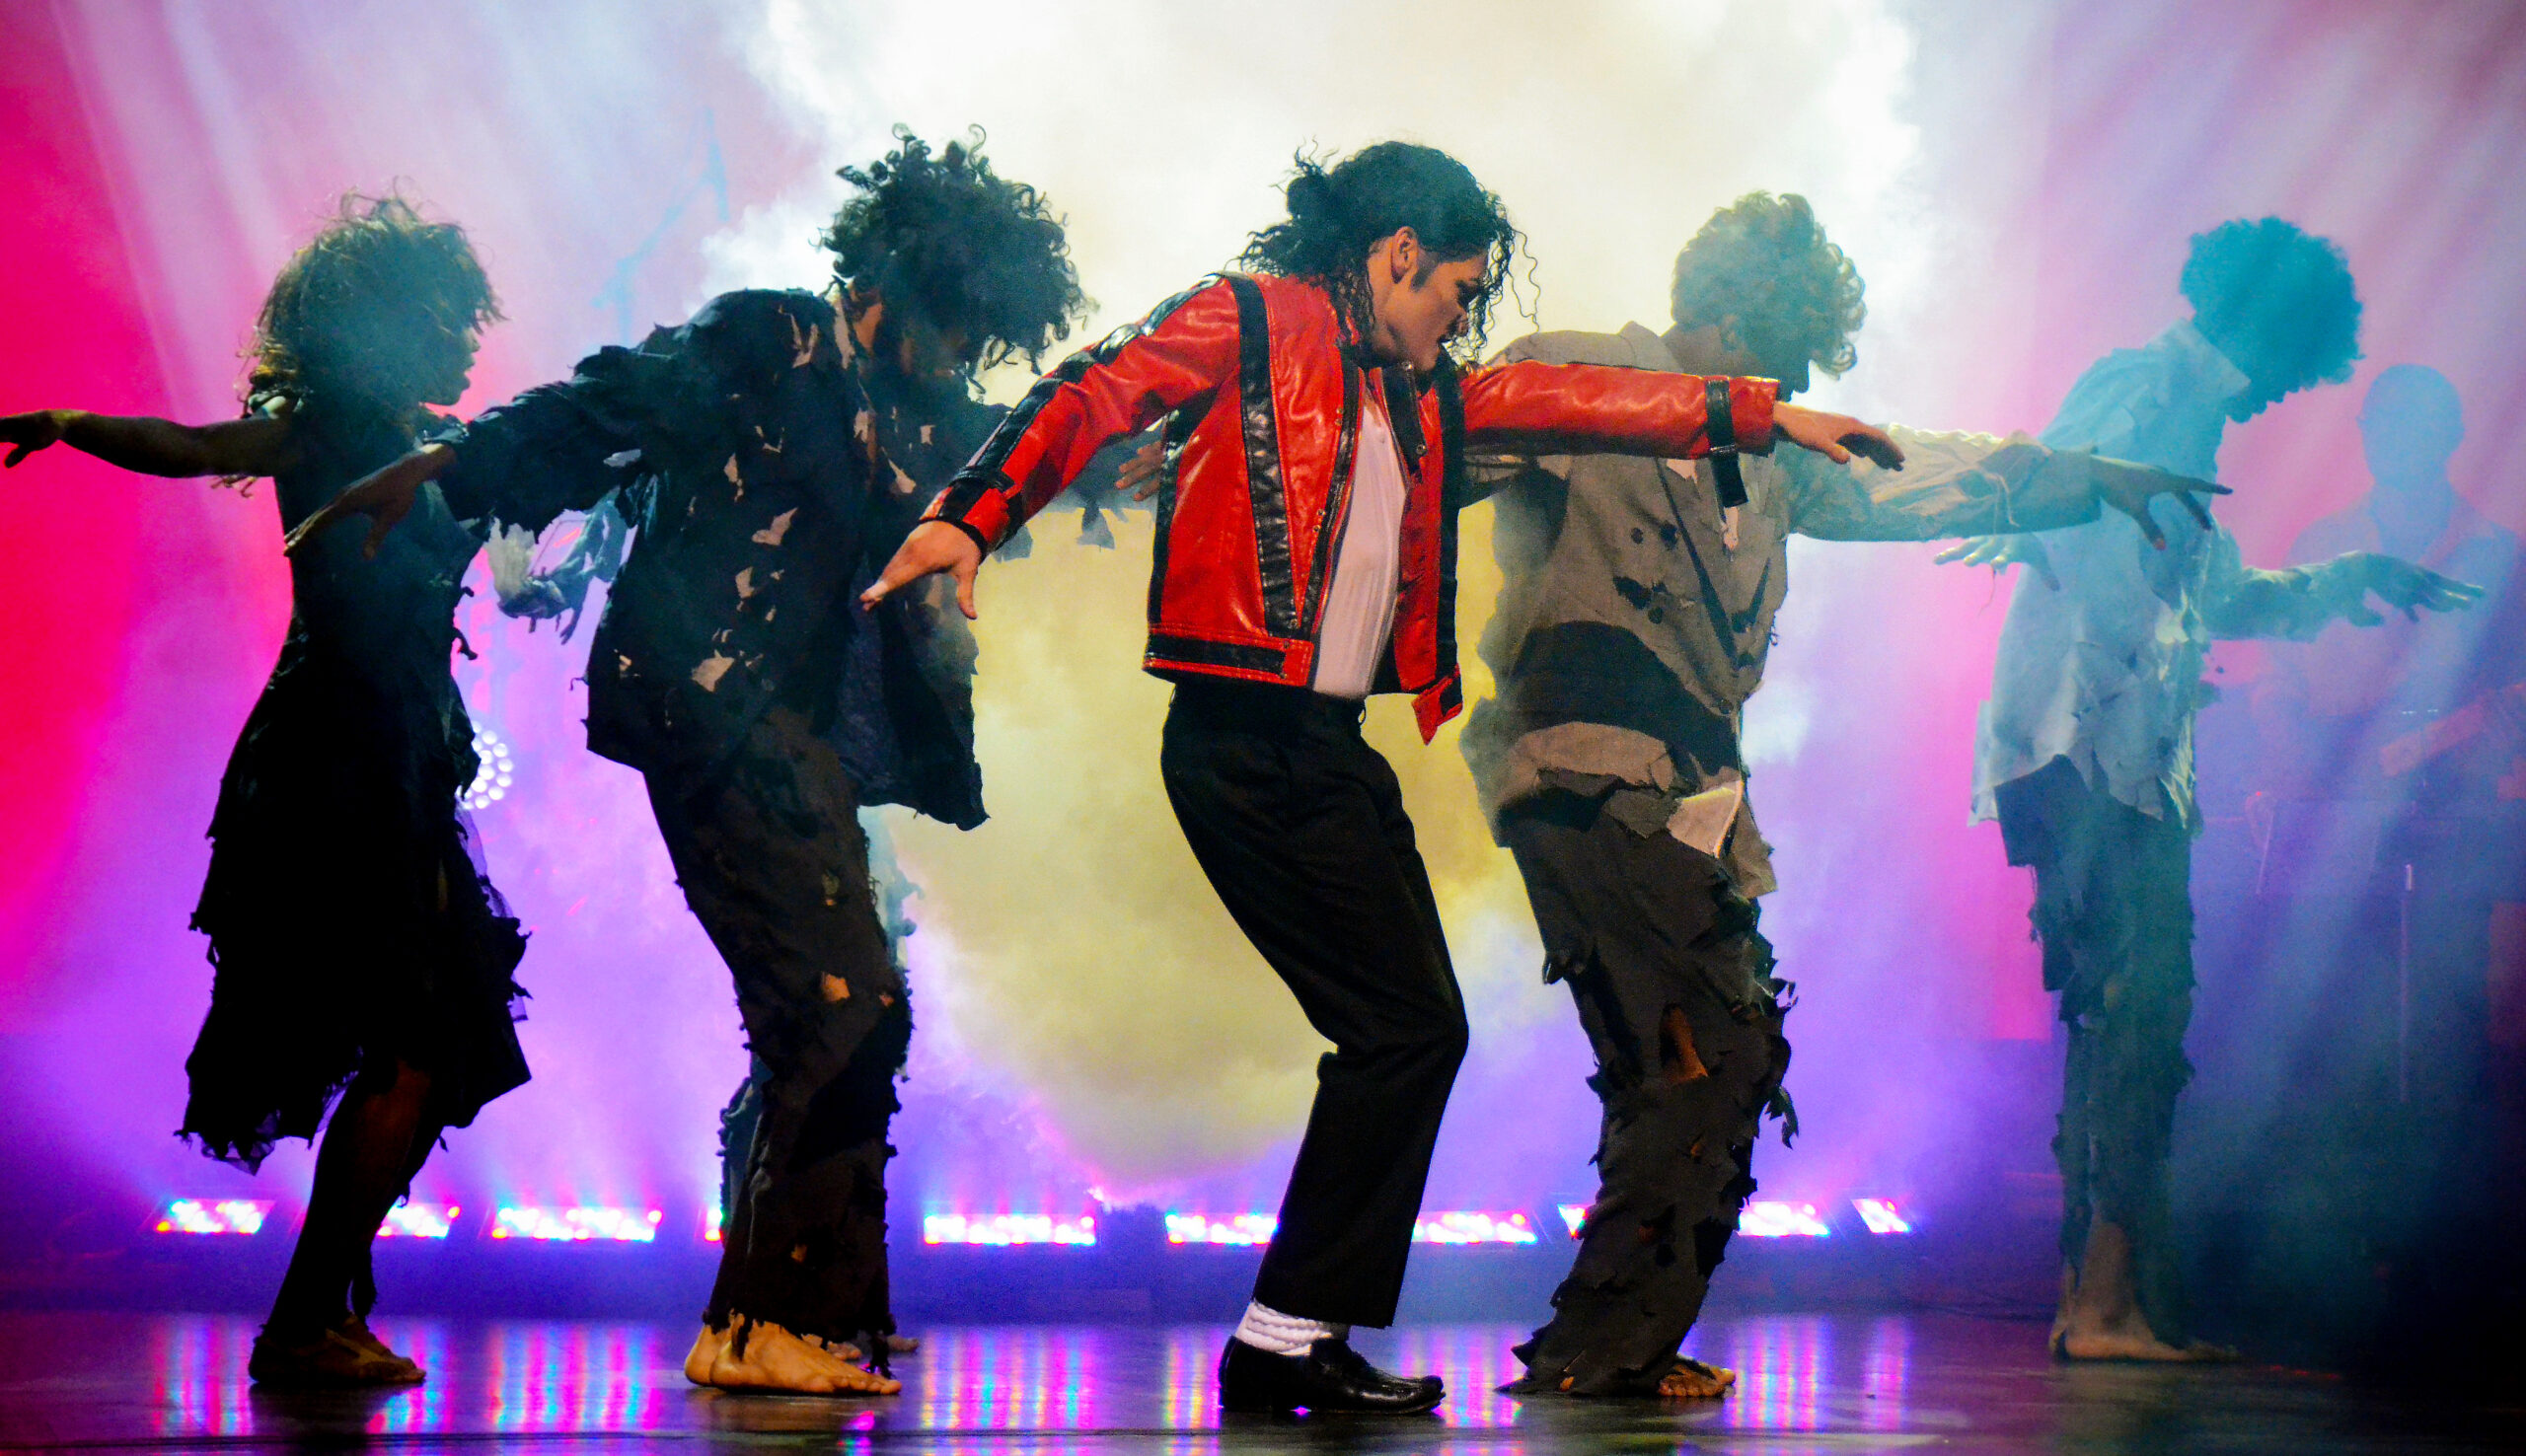 Michael Jackson tribute band on stage dancing "Thriller"